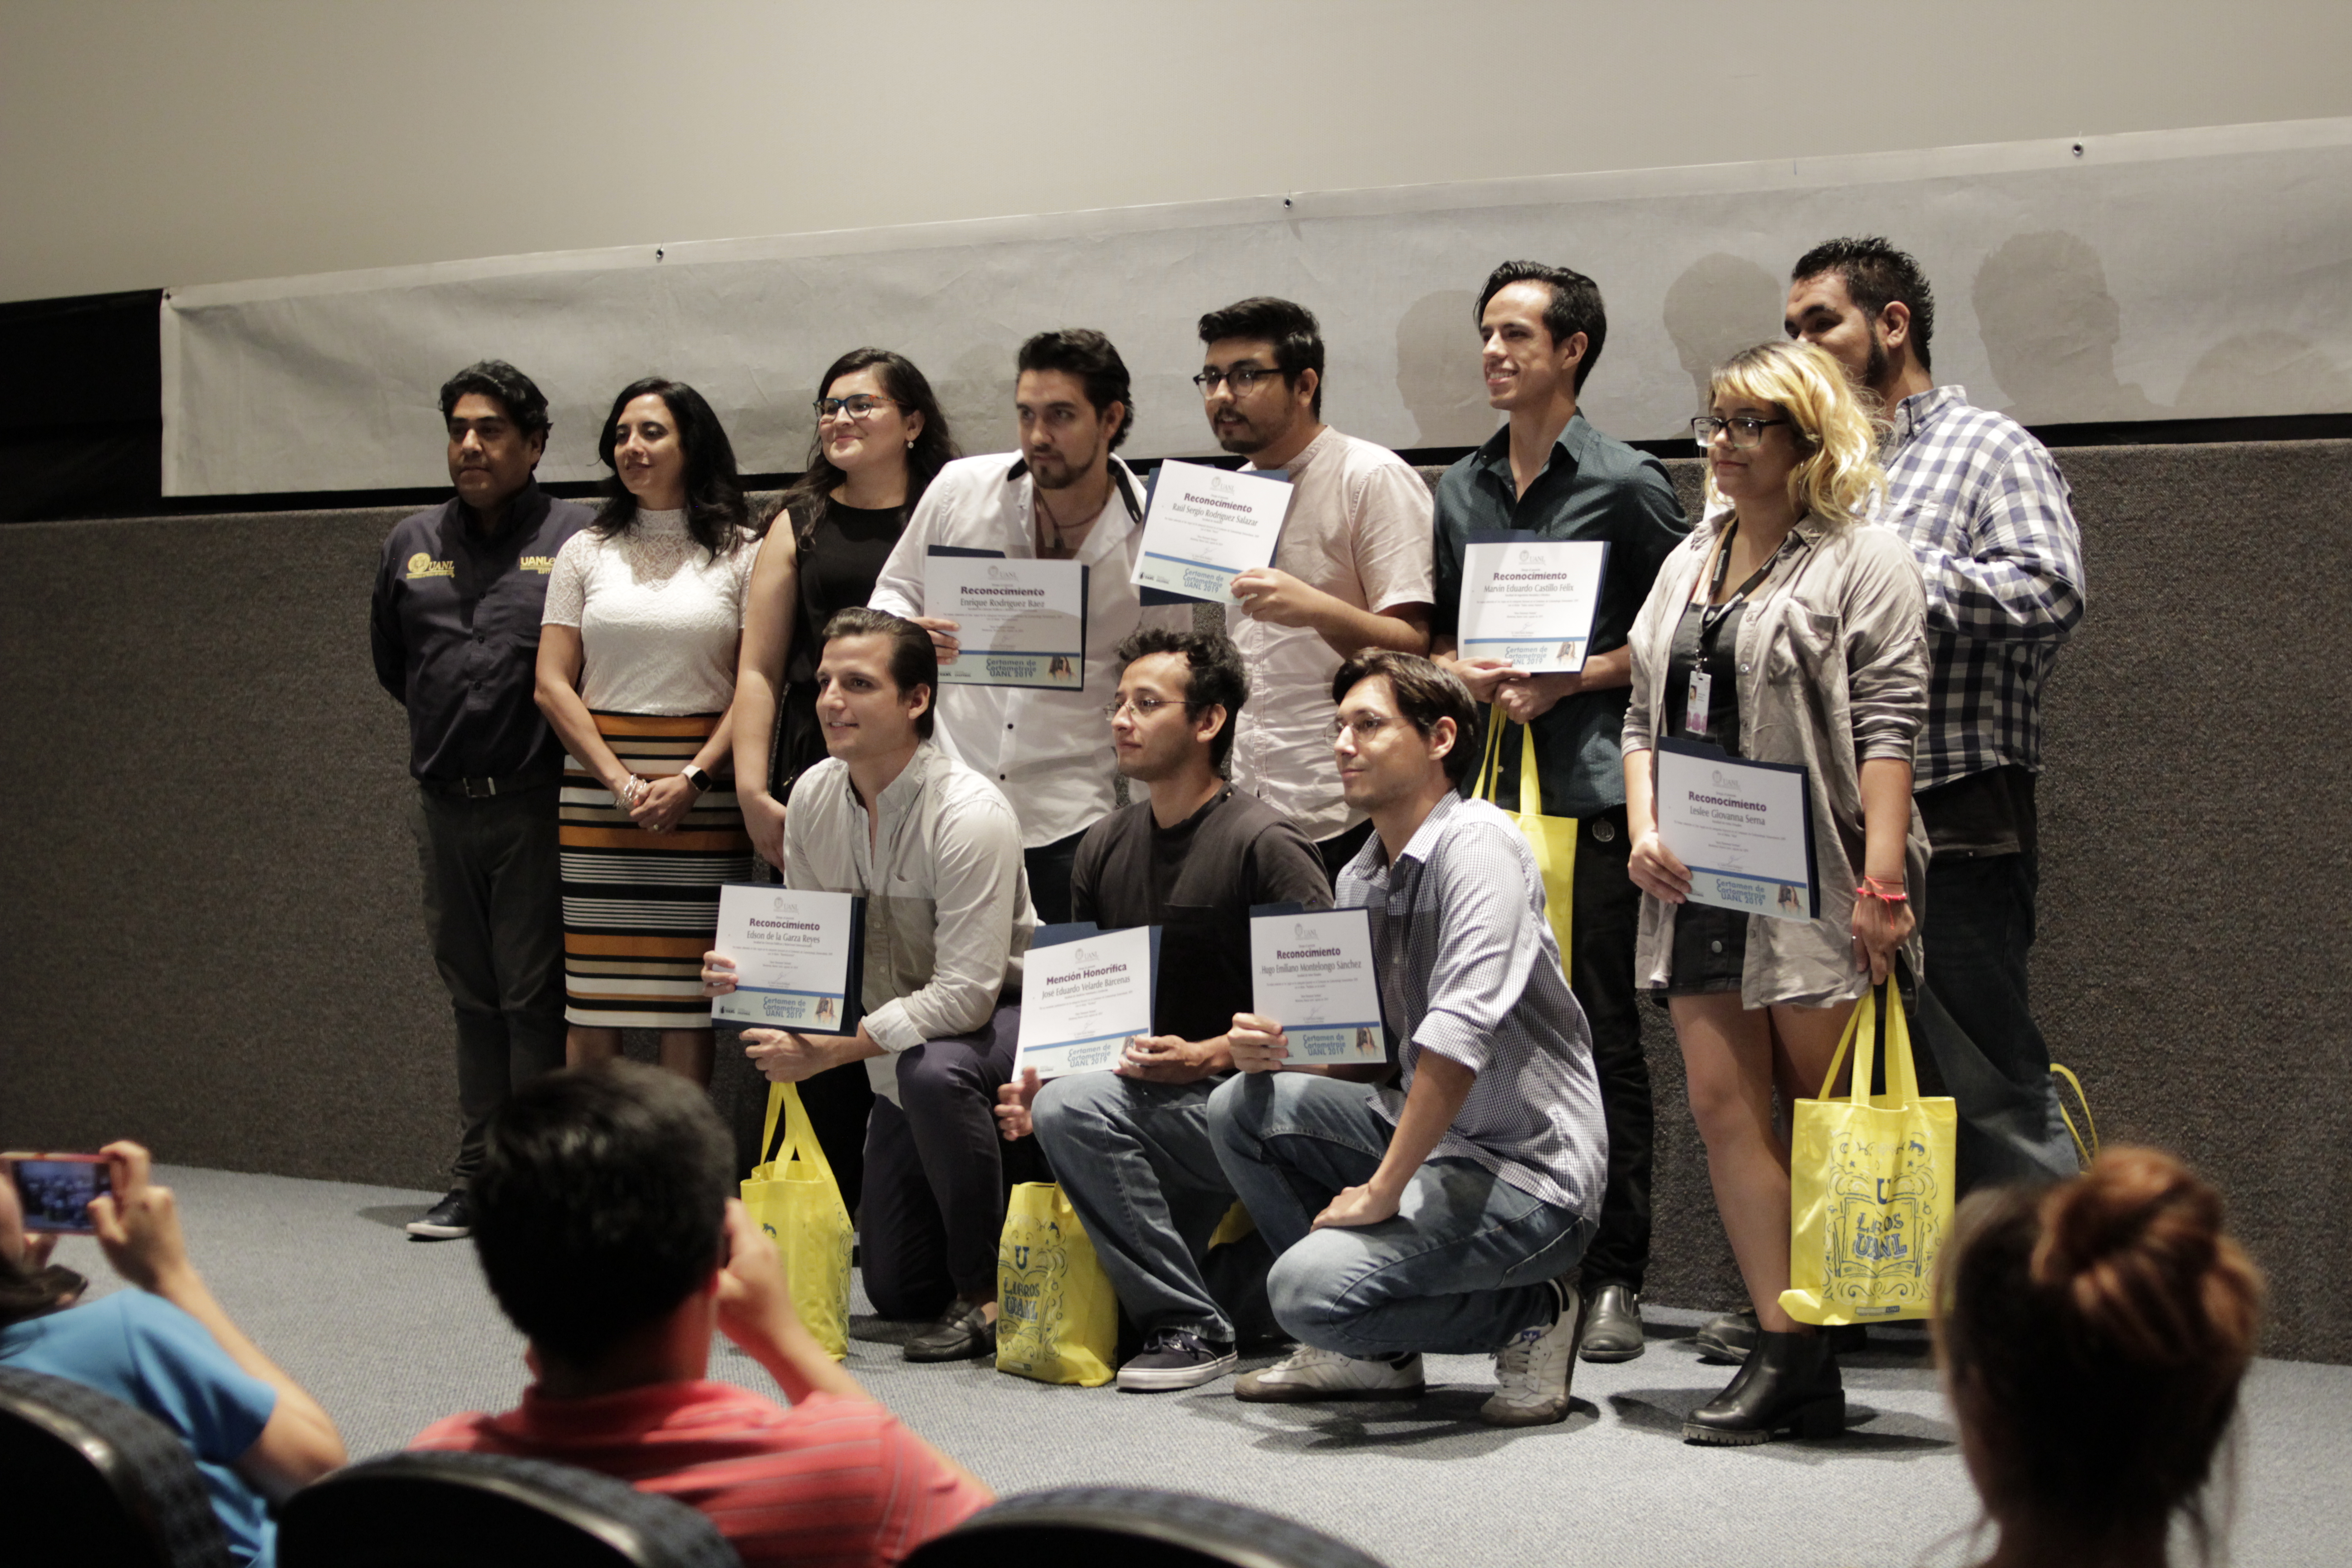 Winners of the UANL Short Film Contest were announced.